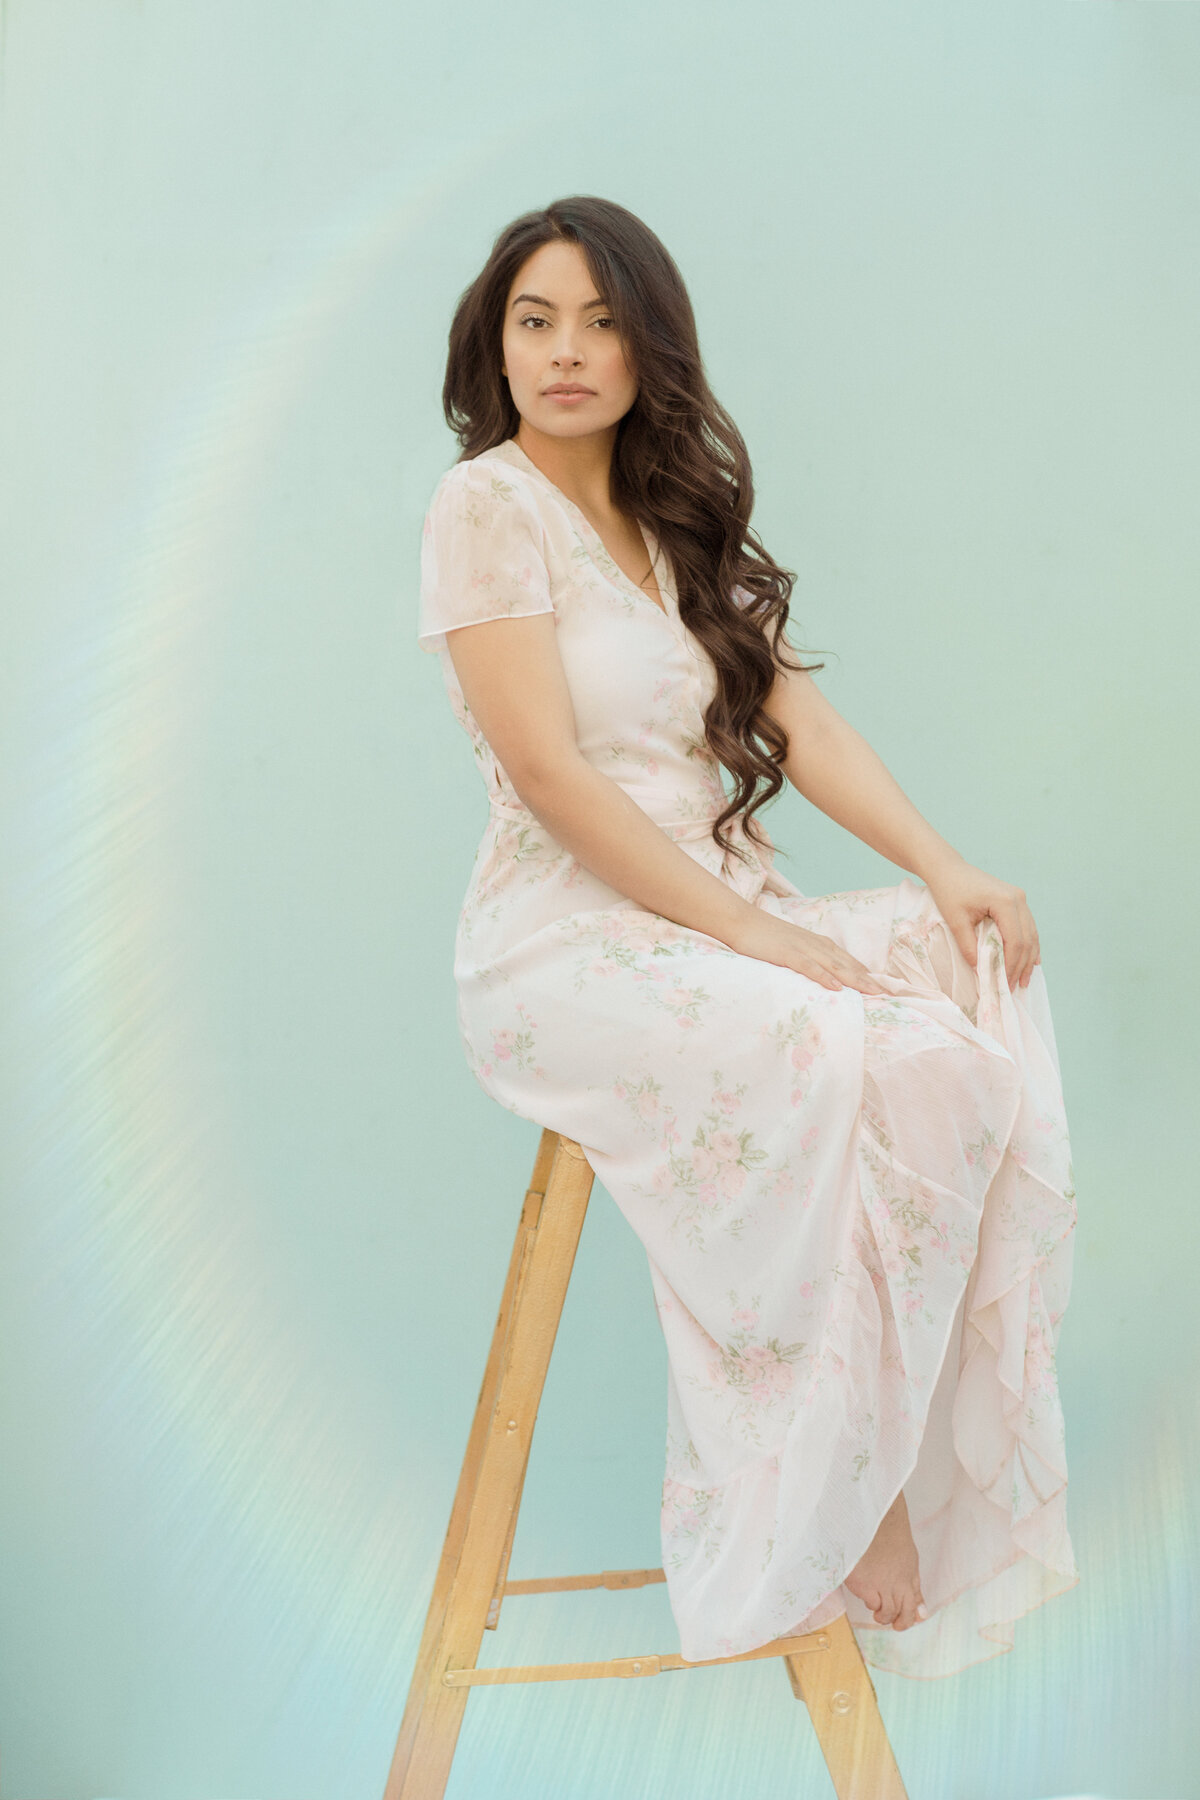 Portrait Photo Of Young Woman In White Dress Sitting On a Stool Los Angeles